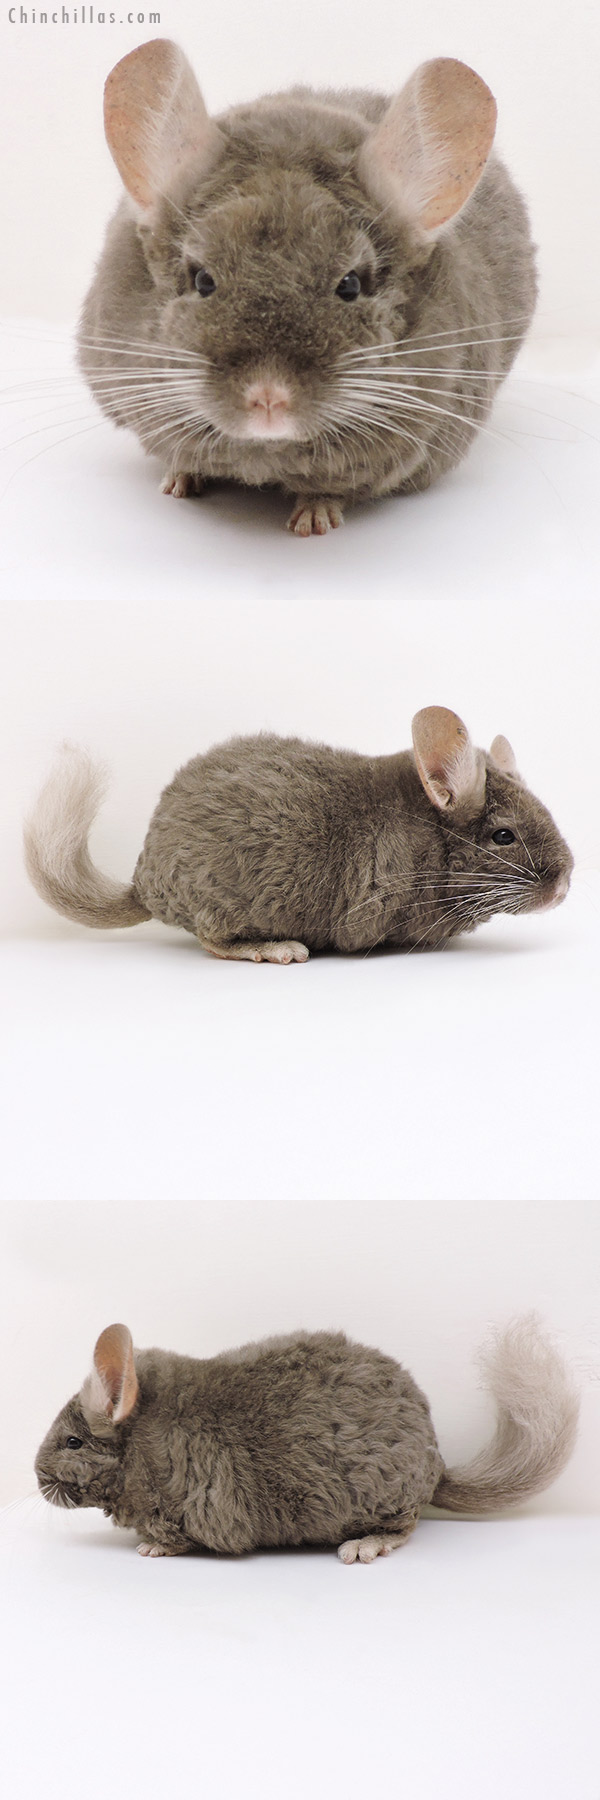 Chinchilla or related item offered for sale or export on Chinchillas.com - 17177 Large Full Locken Tan Female Chinchilla